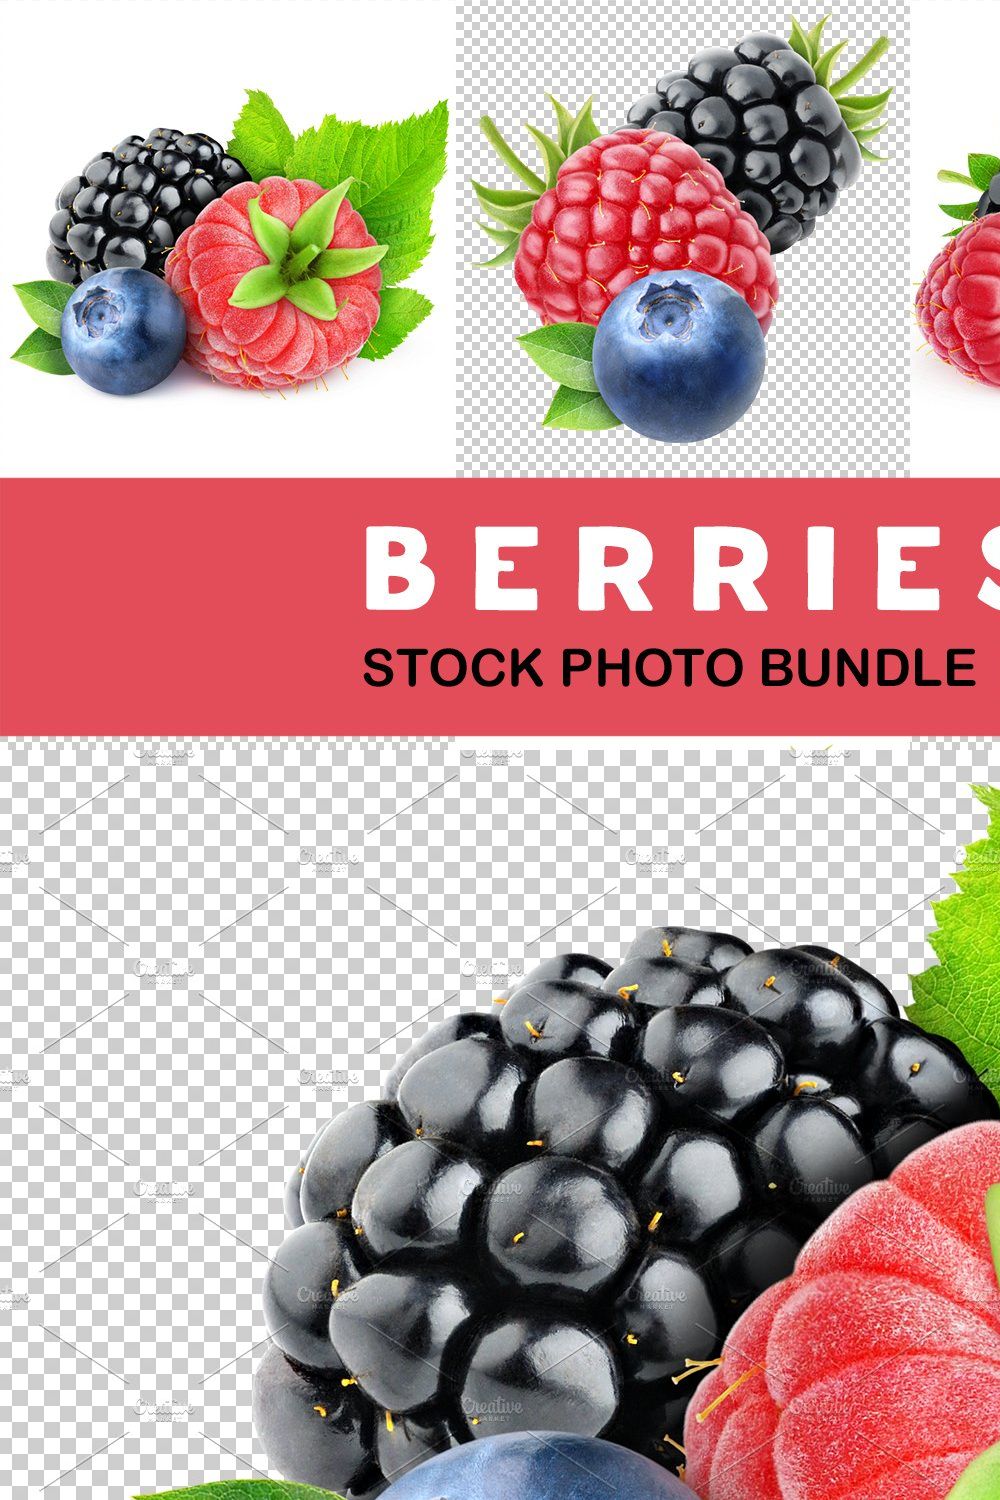 Blueberry, raspberry and blackberry pinterest preview image.